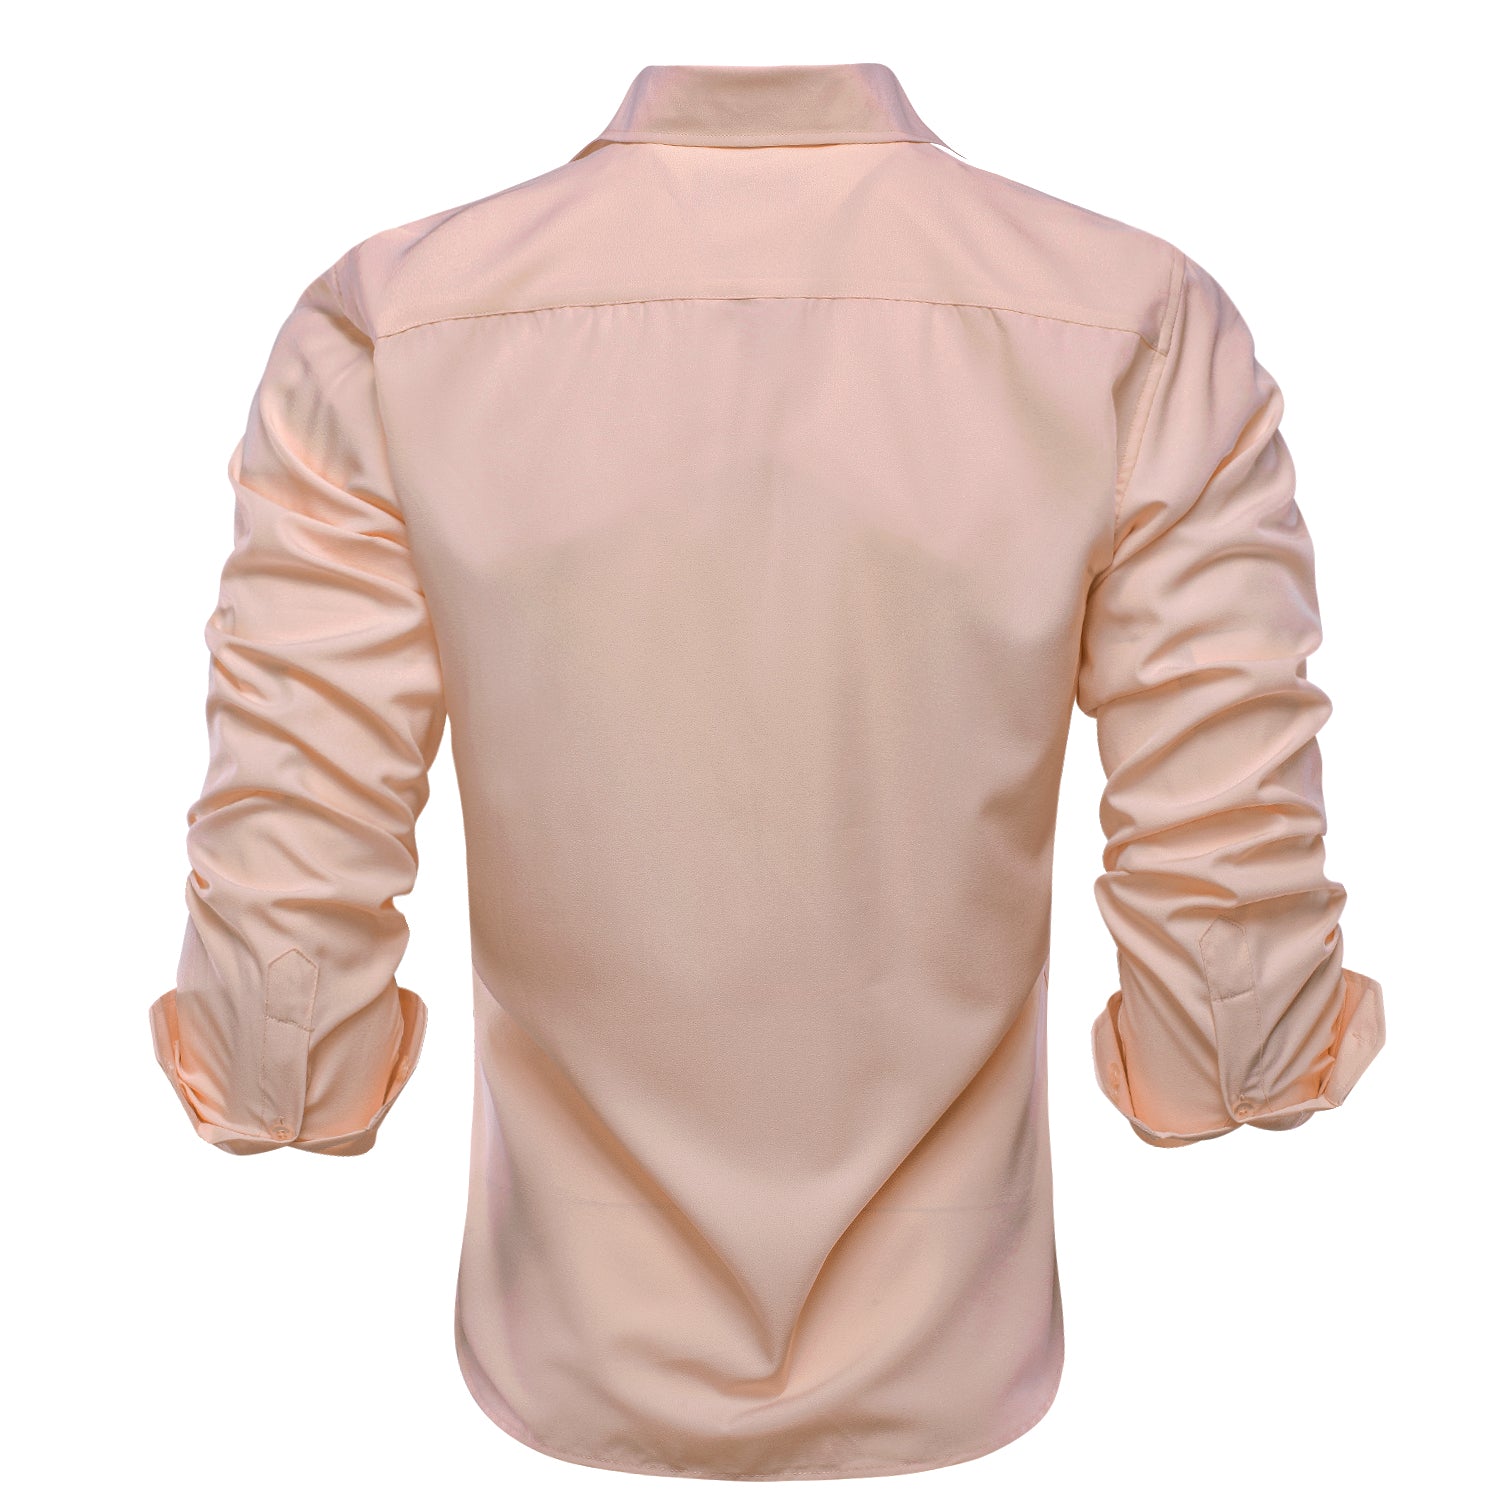 New Pink White Solid Stretch Men's Long Sleeve Dress Shirt